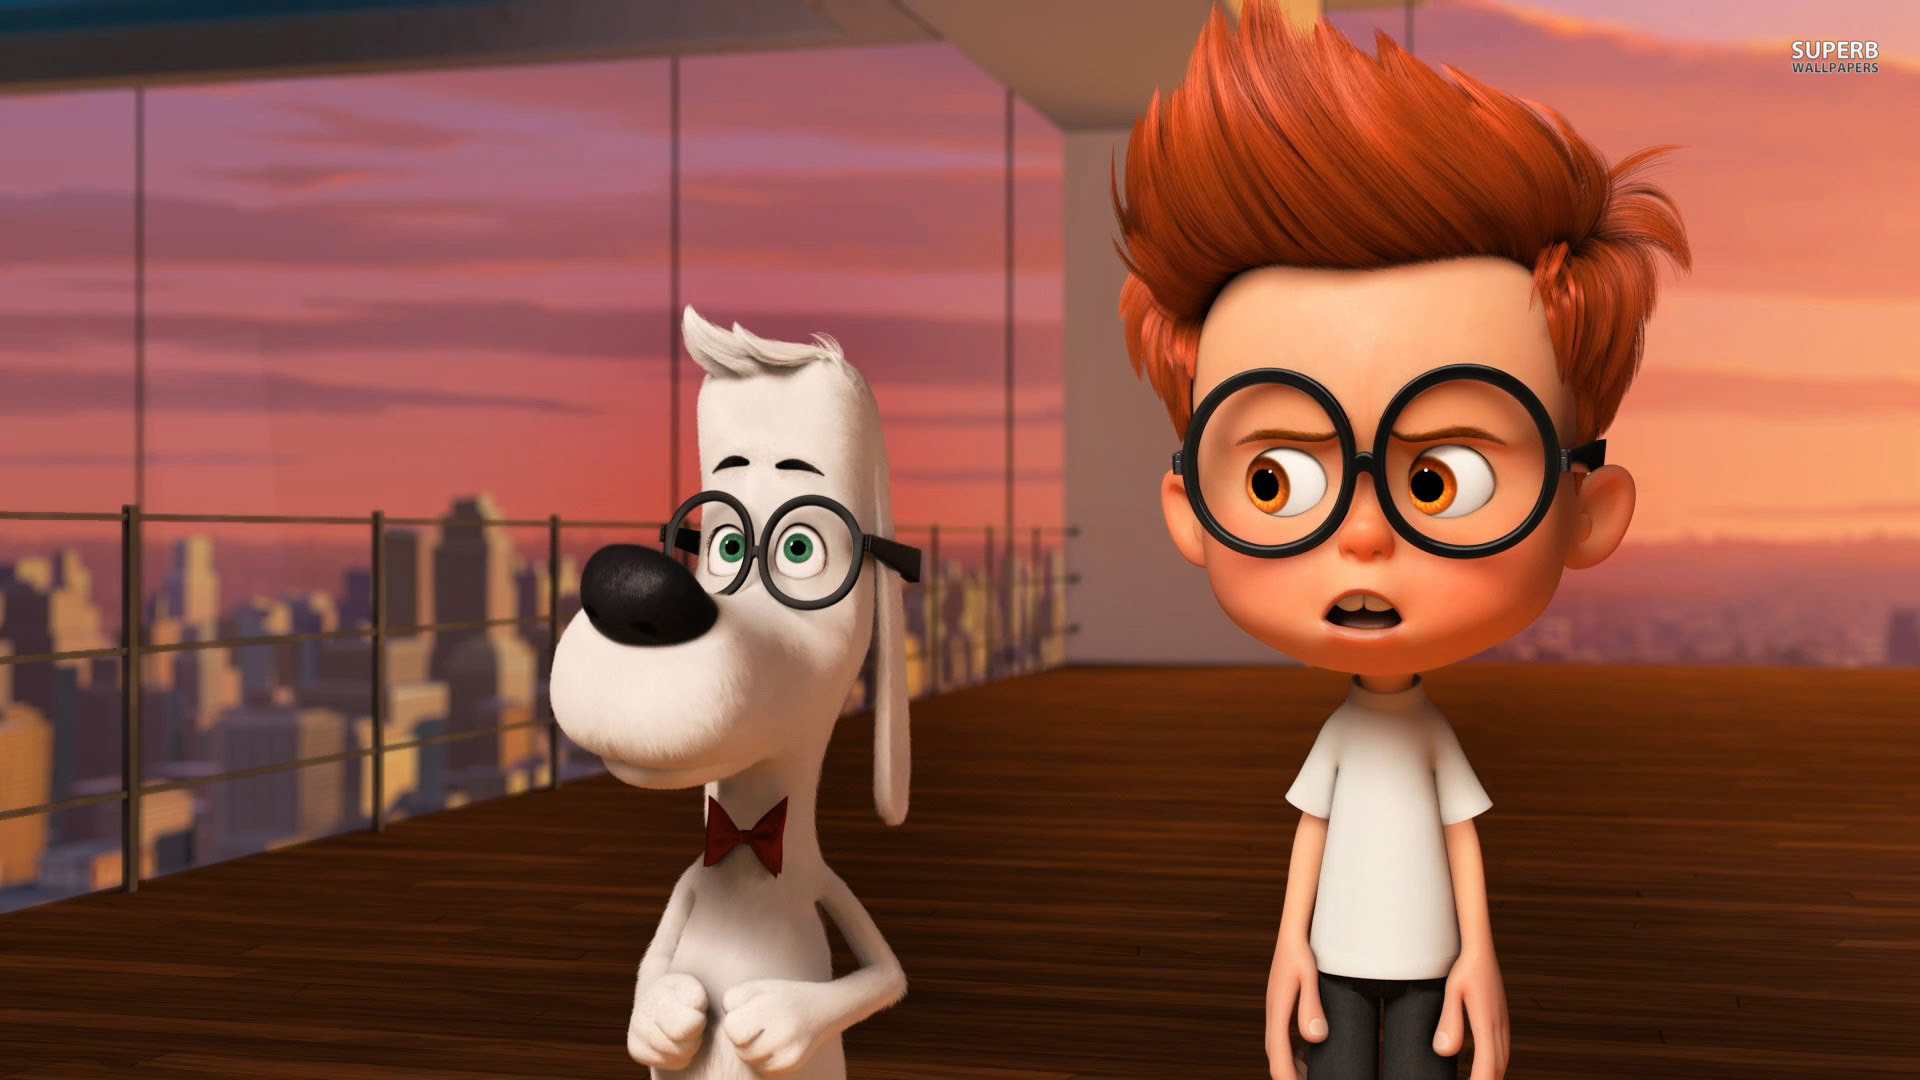 'Mr. Peabody & Sherman' teach young and old about getting along